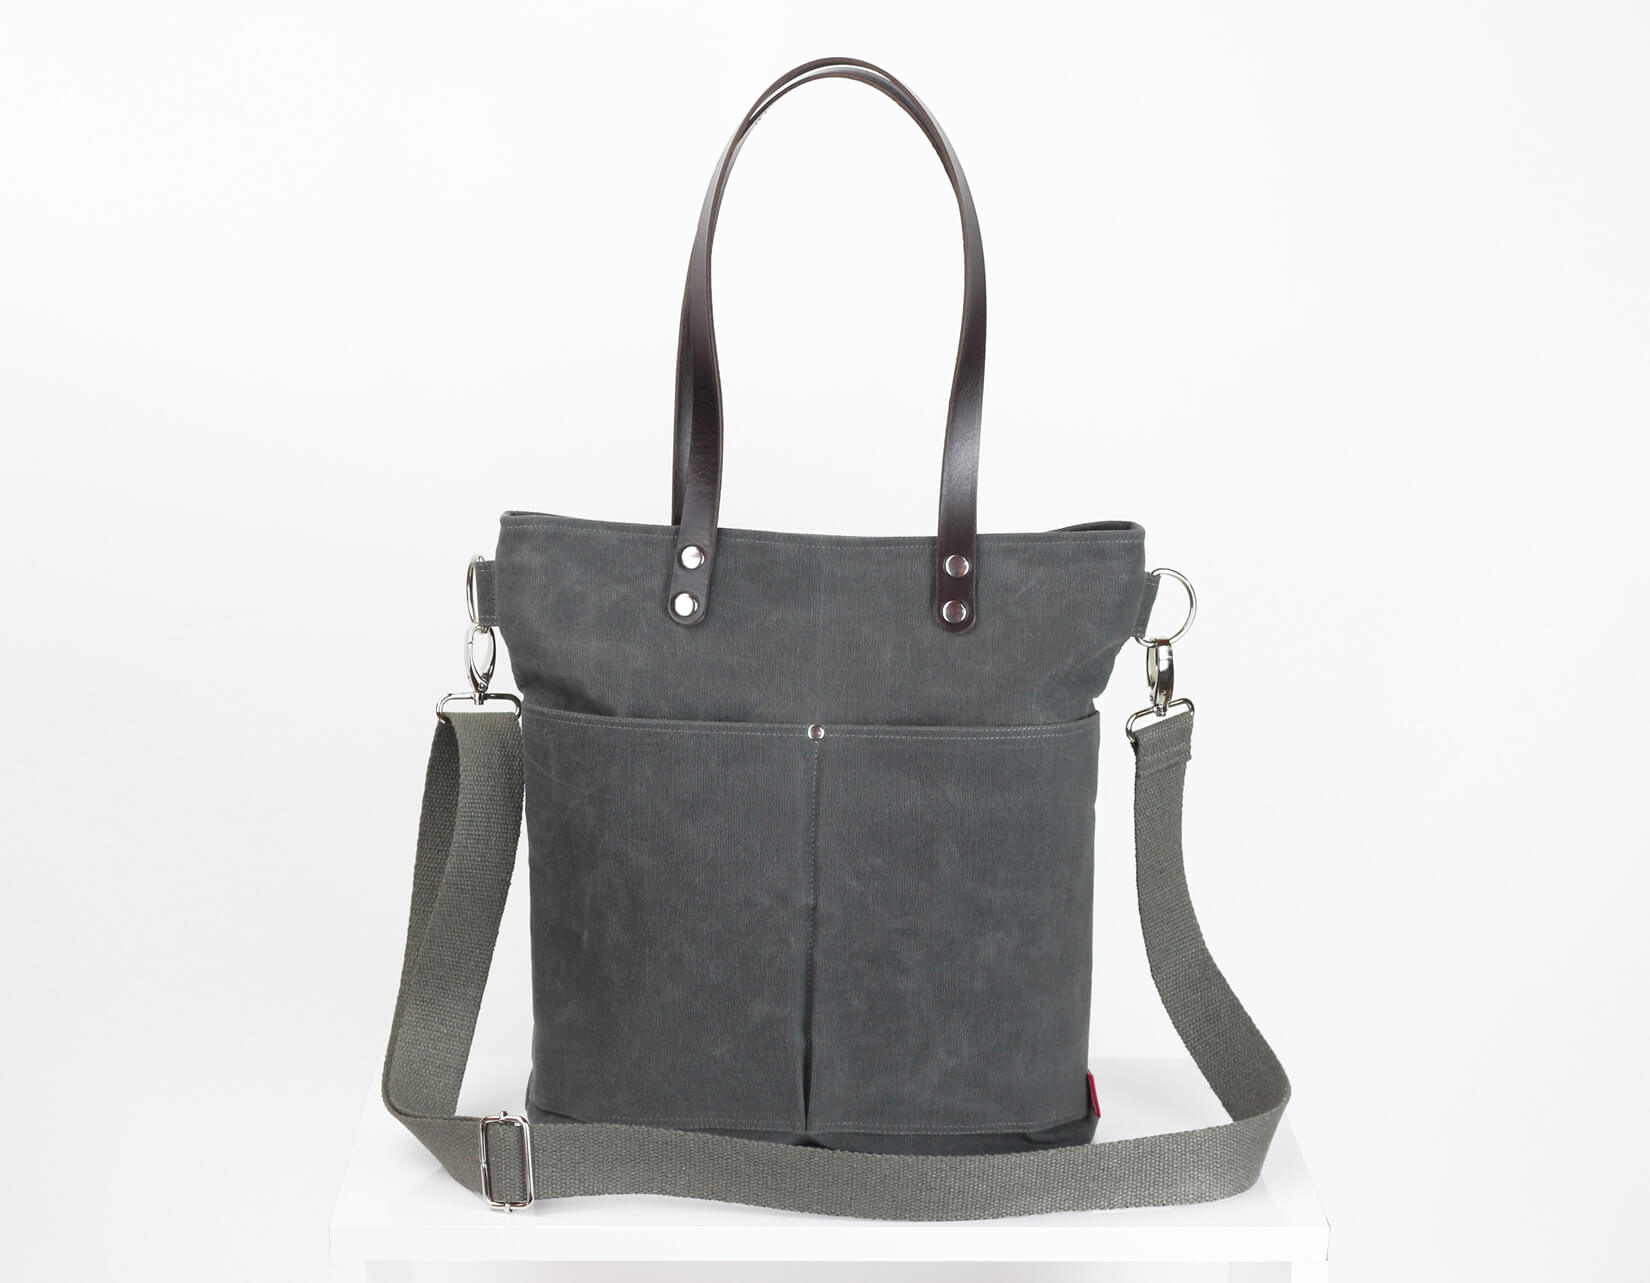 Waxed tote bag with long leather strap, extra thick leather, gray, waxed canvas, large tote ...